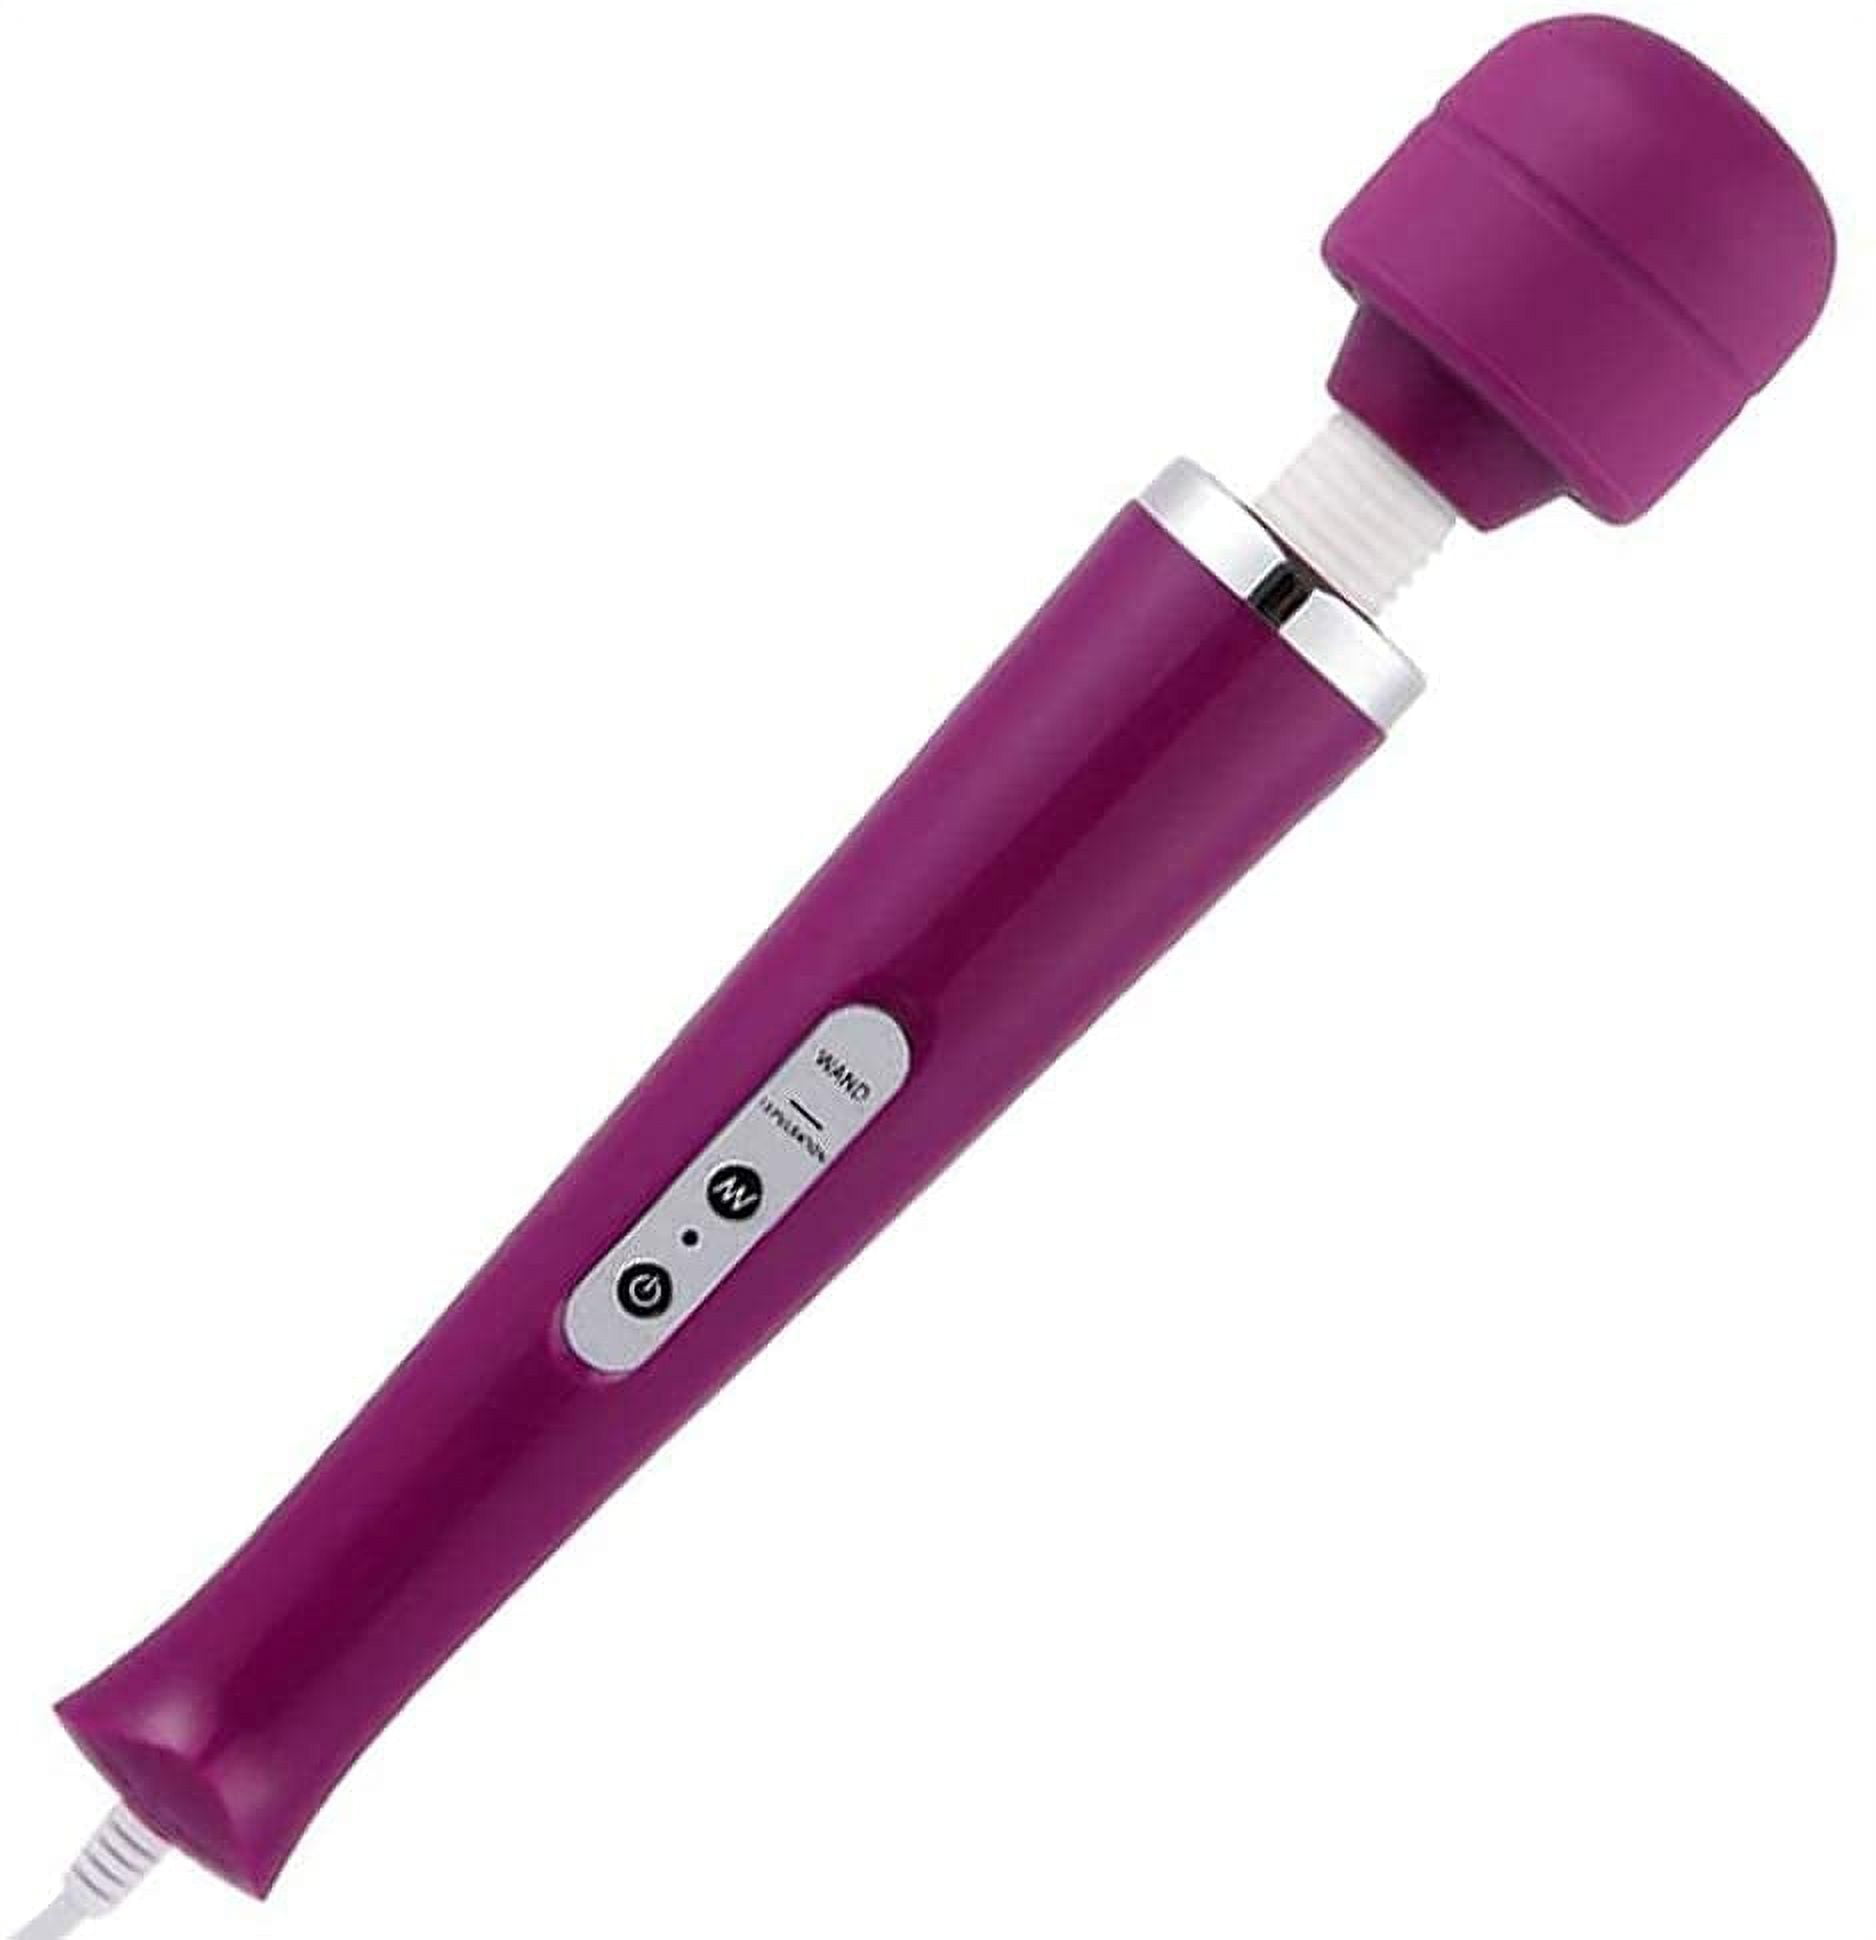 Personal Wand Electric Massager with 10 Powerful Magic Vibrations, Handheld  Neck Shoulder Back Body Massager Wand Massage for Deep Muscles Pain Relief